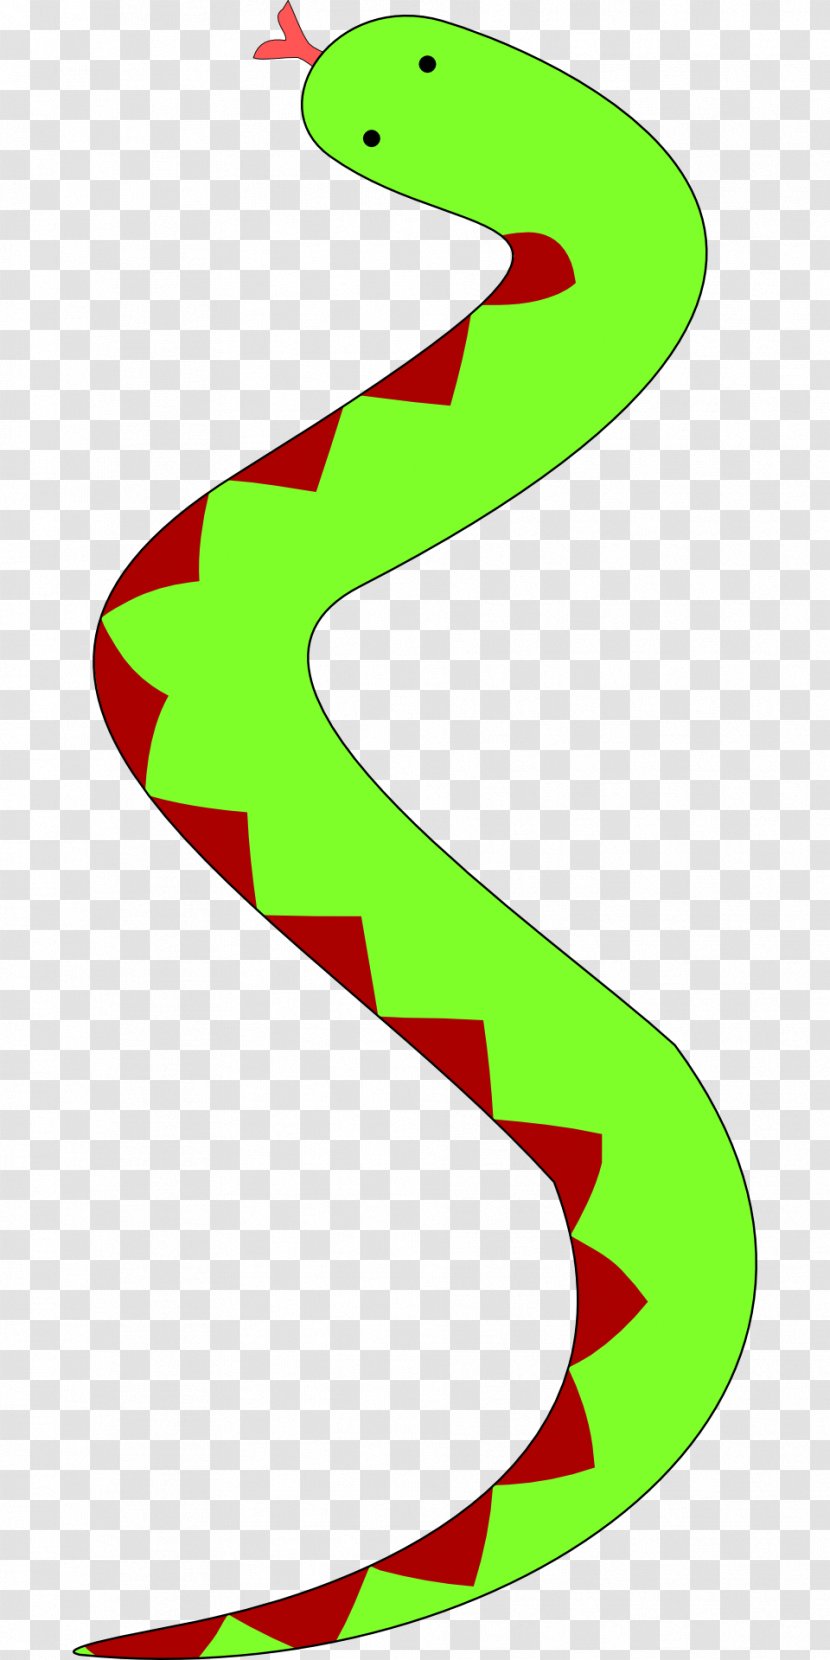 Snakes And Ladders Clip Art - Board Game - Reptile Transparent PNG